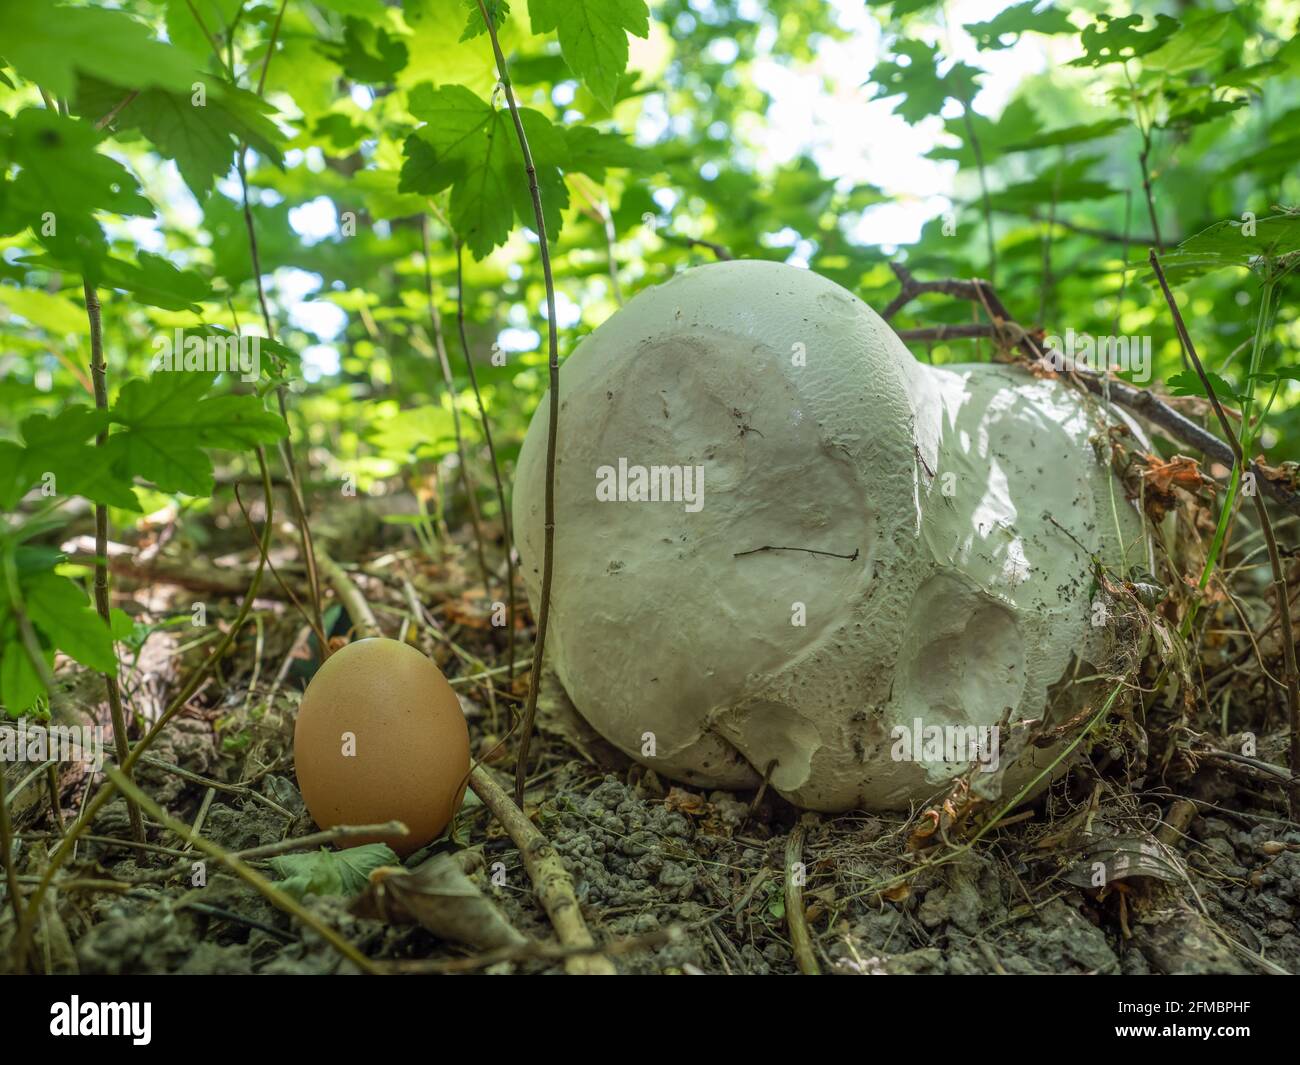 Giant bovist and an egg for size comparison, North Rhine-Westphalia, Germany Stock Photo